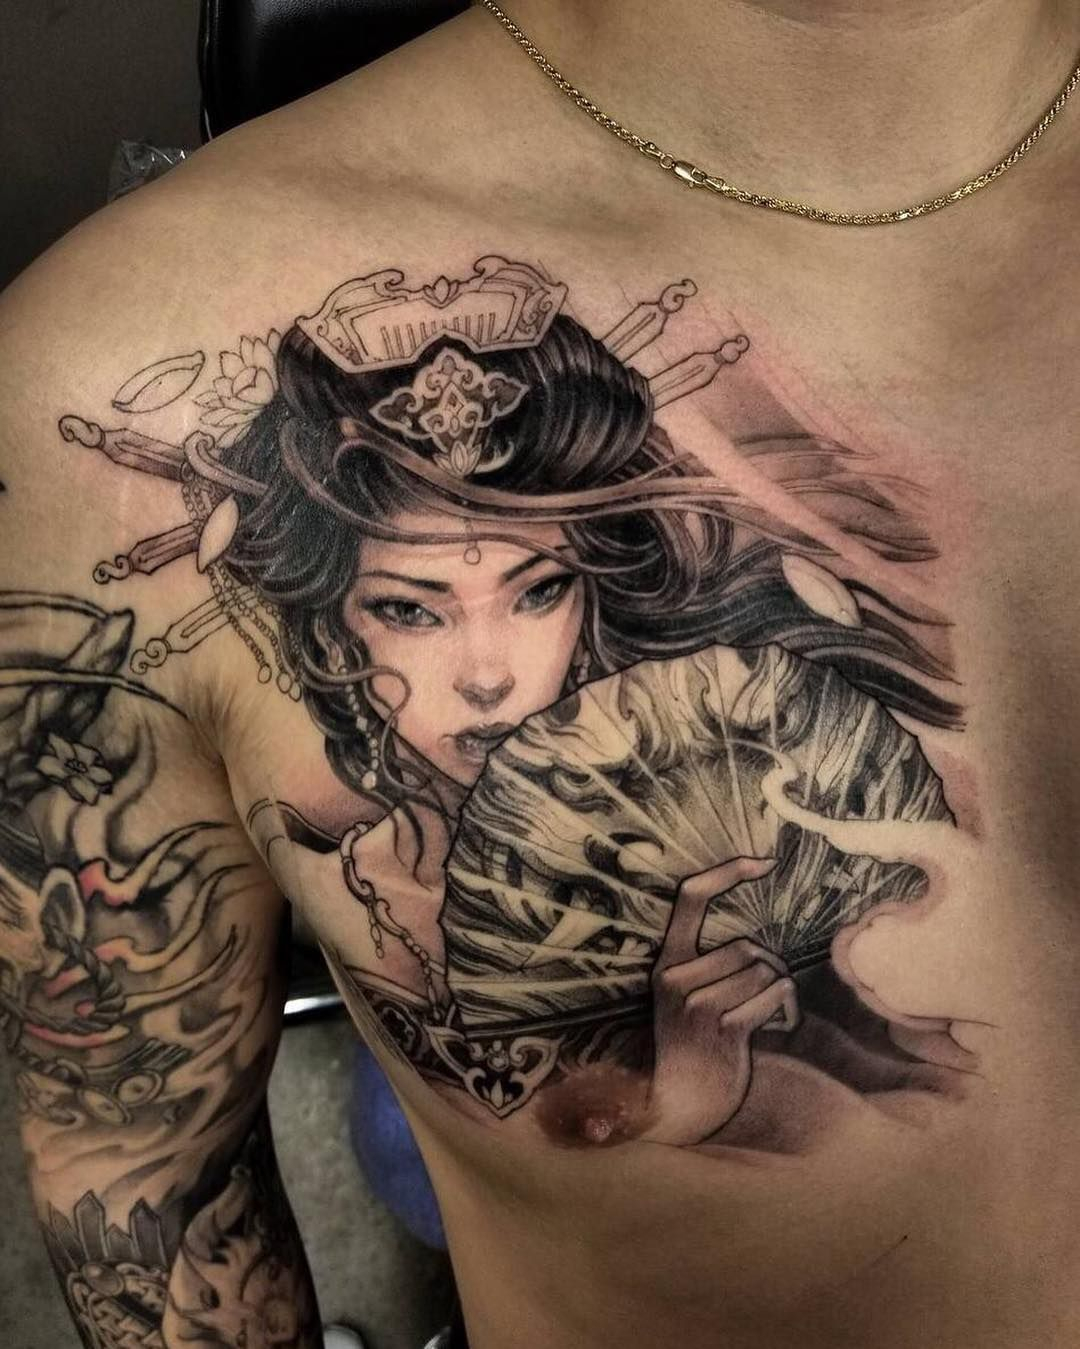 Geisha Chest Piece David Hoang Done At Chronic Ink Tattoo intended for size 1080 X 1349